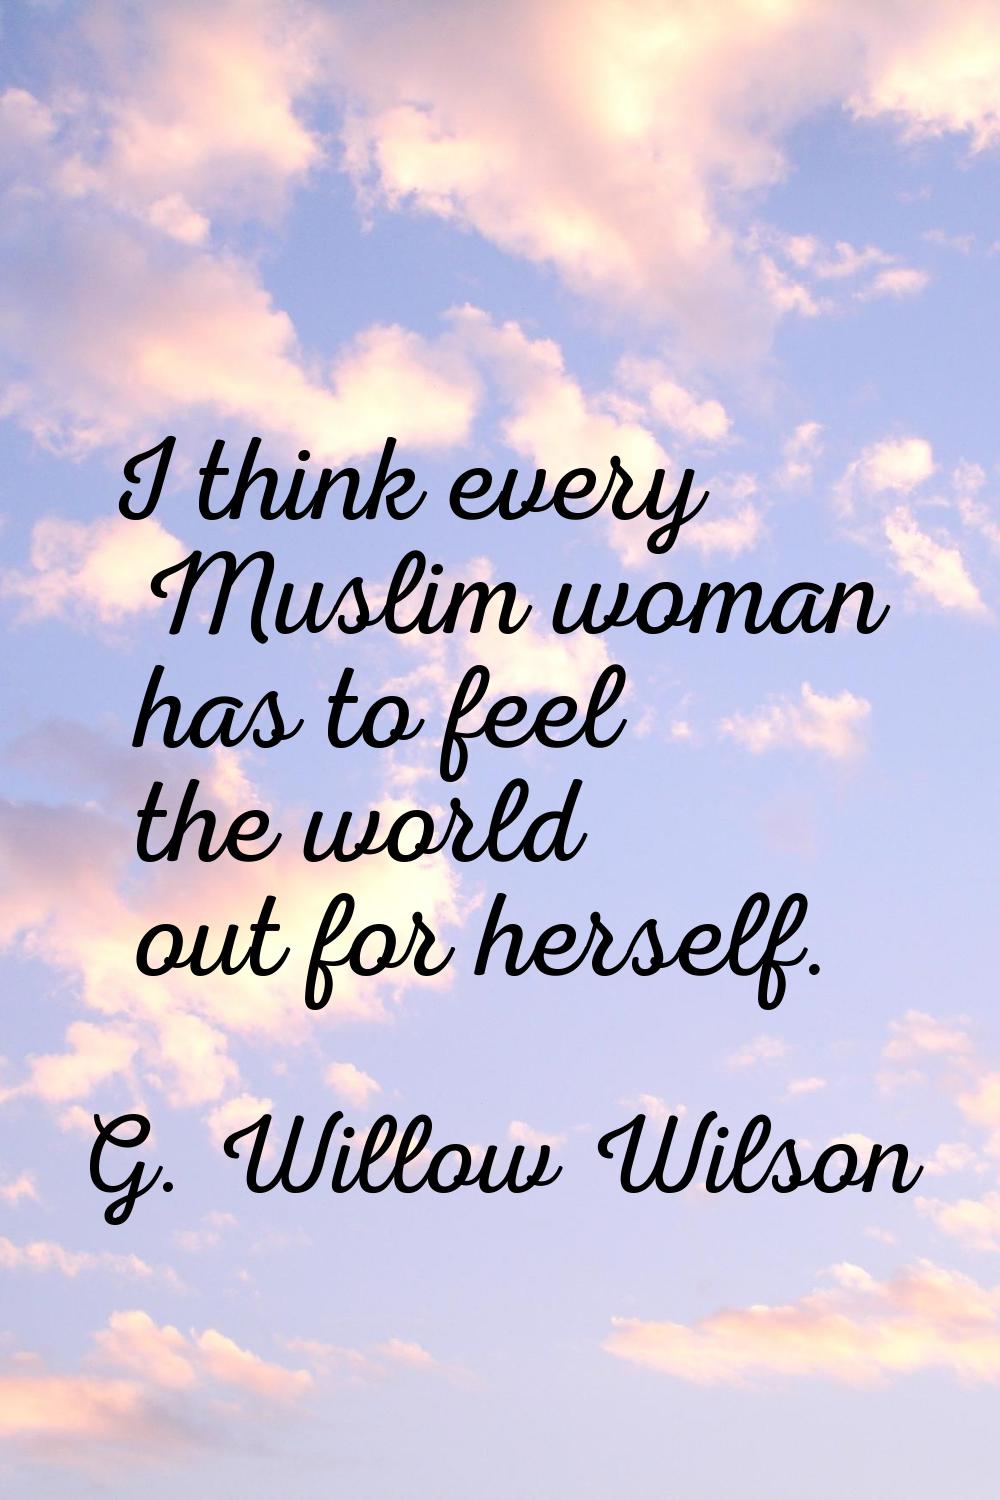 I think every Muslim woman has to feel the world out for herself.